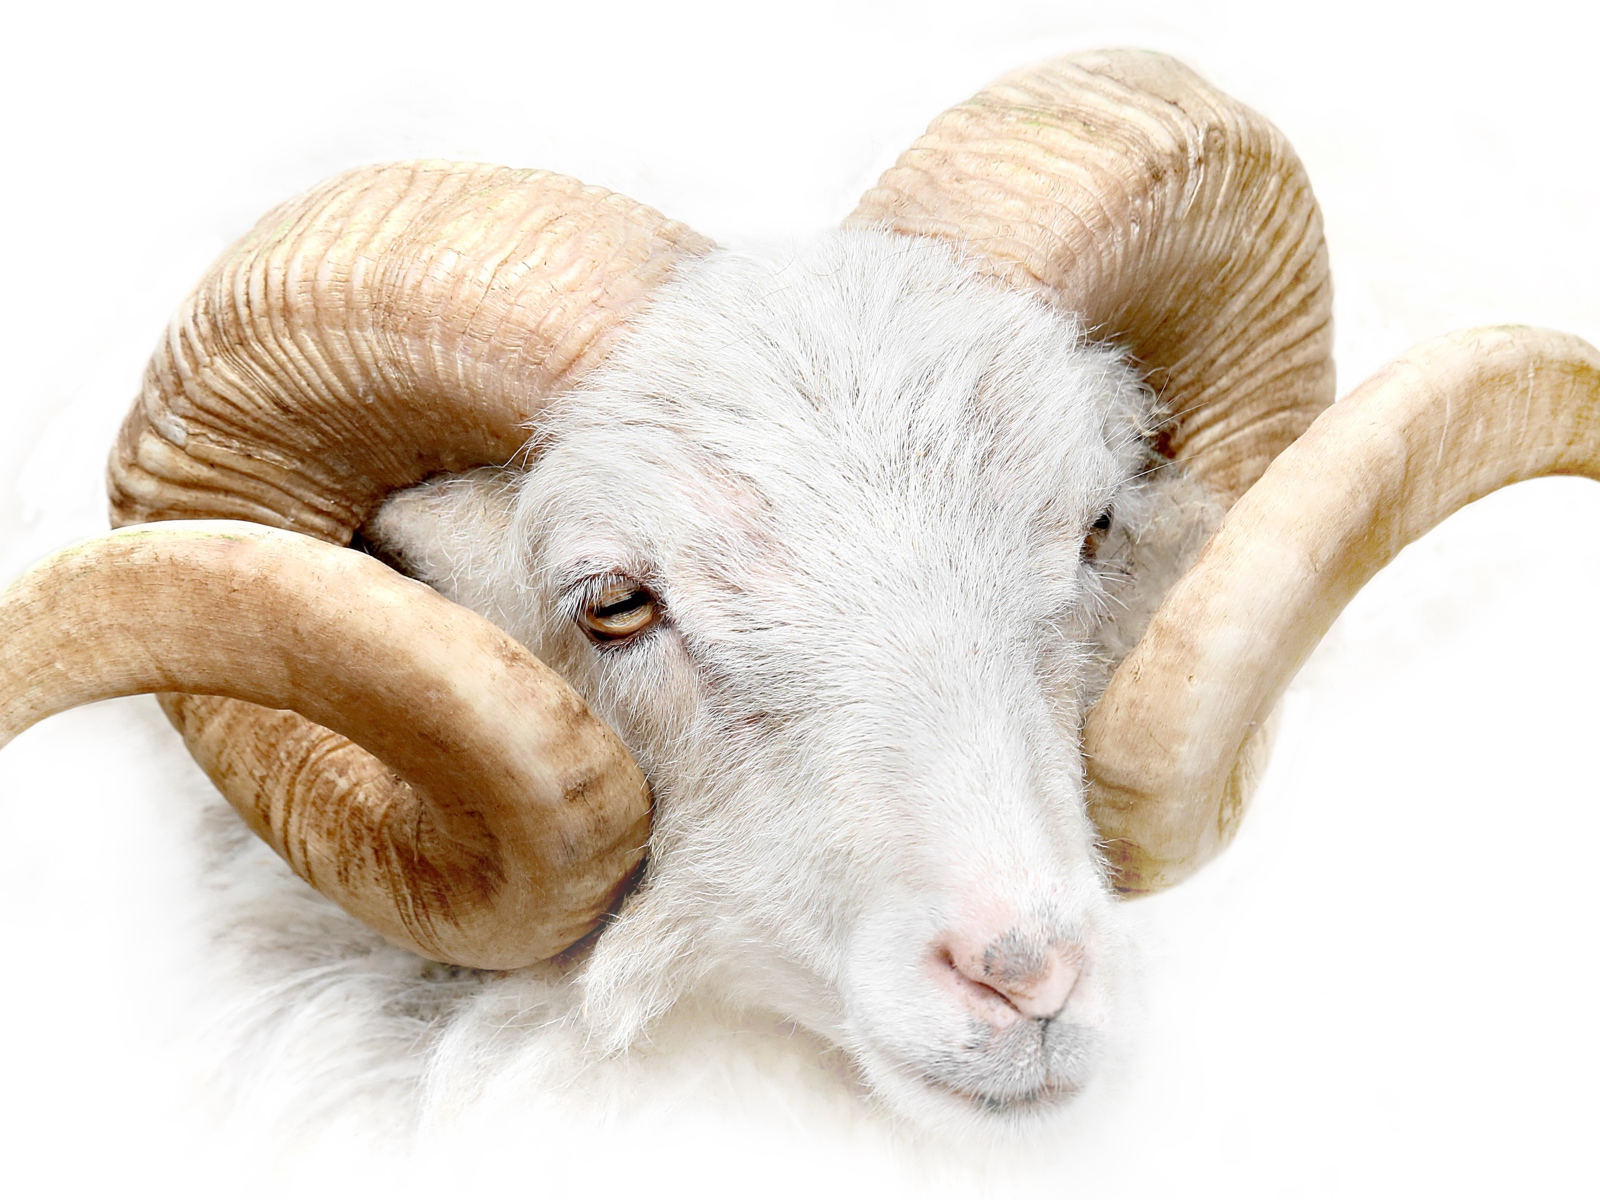 Ram with big horns on a white background